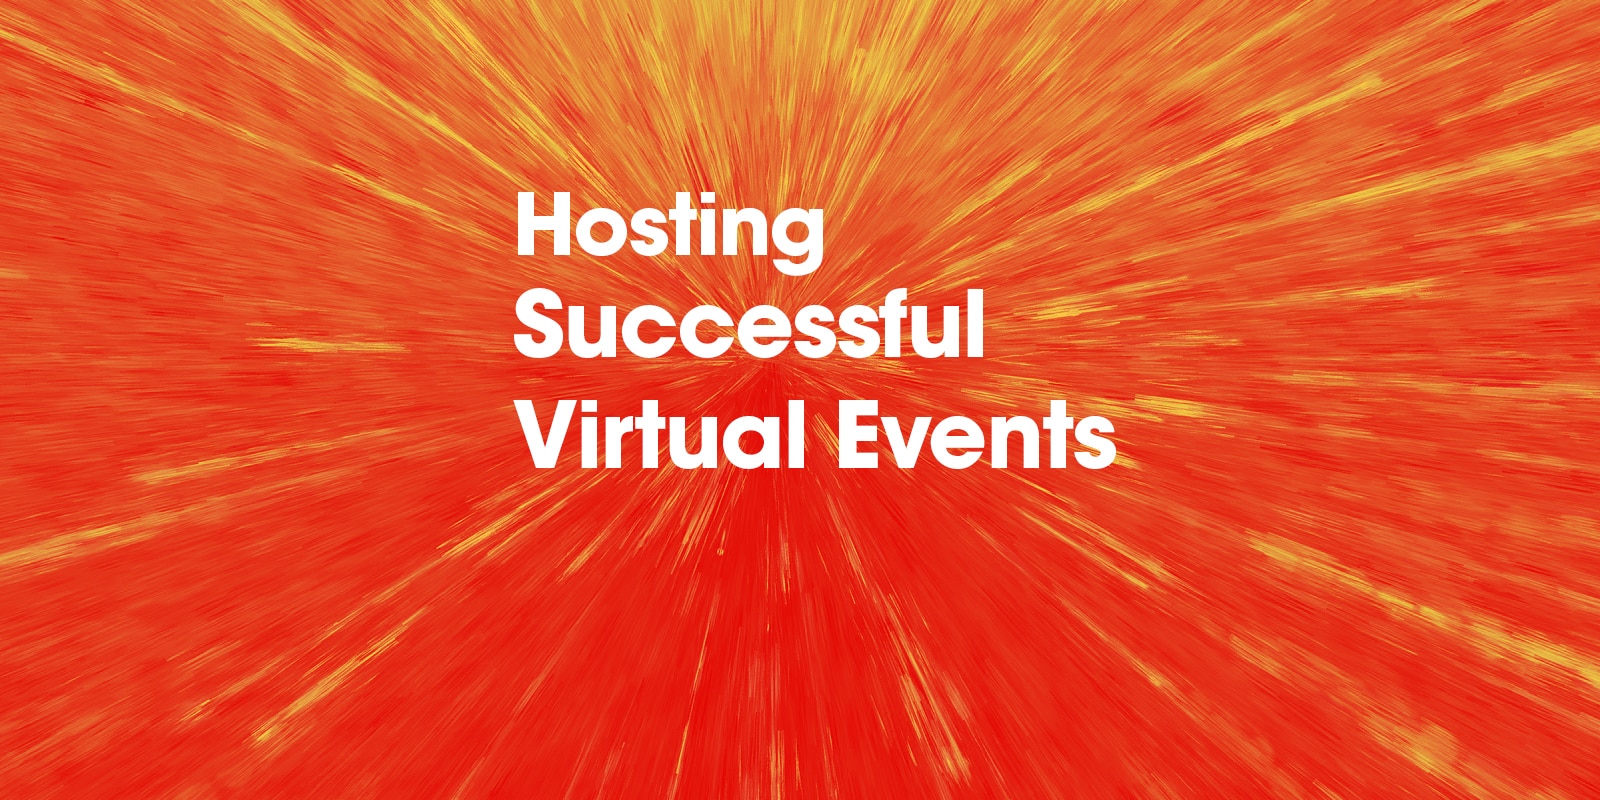 Hosting Successful Virtual Events